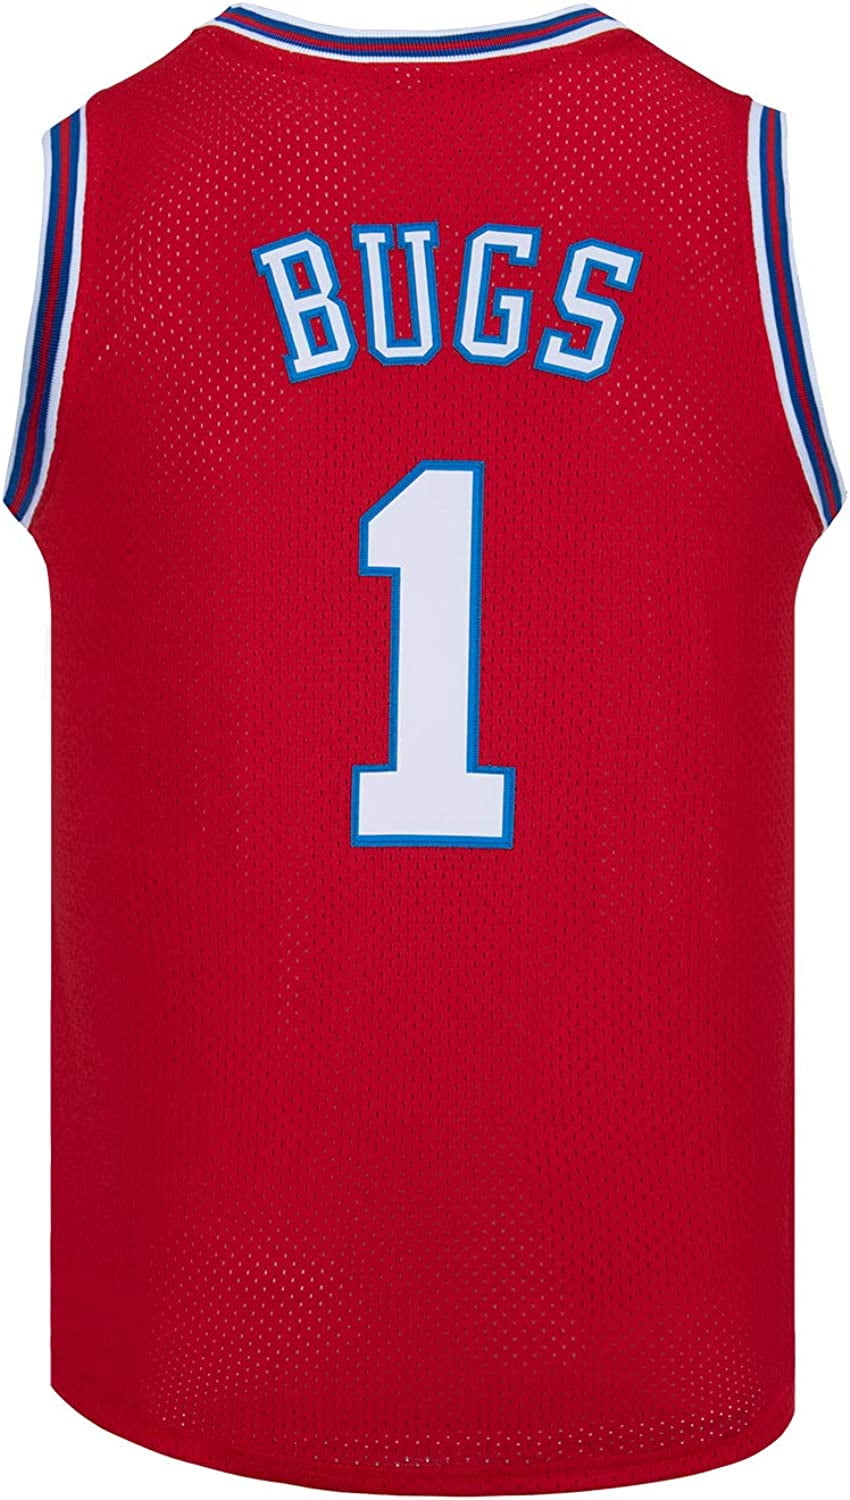  GUCILV Mens Basketball Jersey Bugs #1 Space Movie Jersey Sports  Jersey White X-Small : Sports & Outdoors